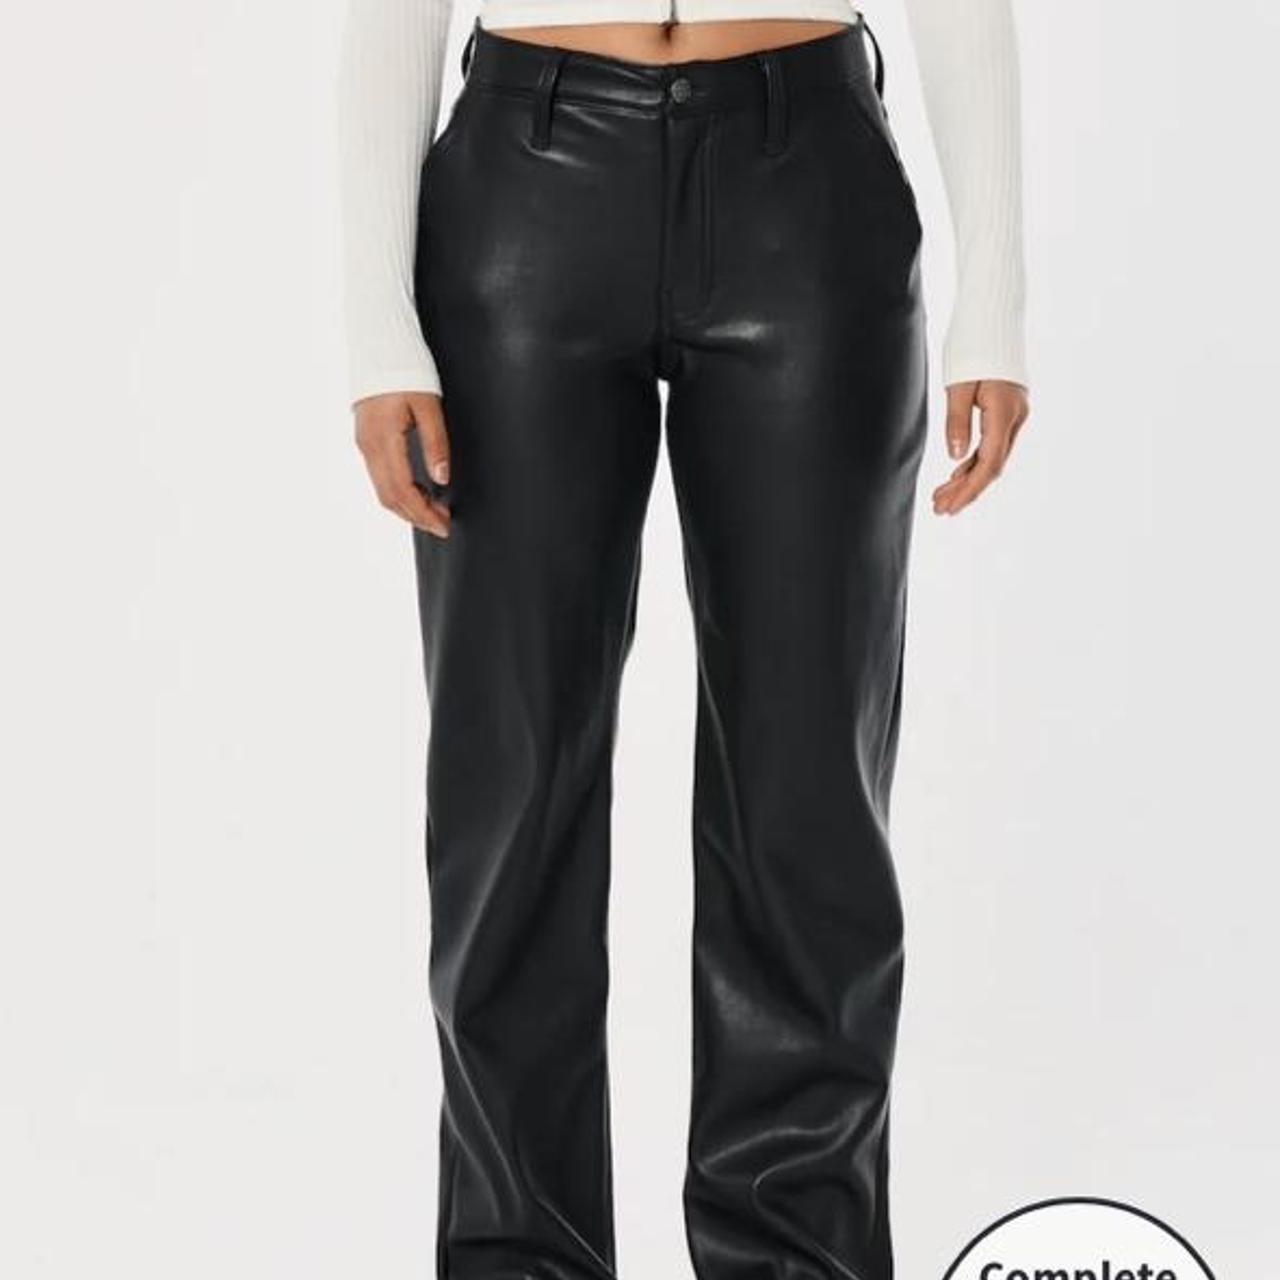 PLEATHER HIGH-RISE DAD PANTS. Made by Hollister.